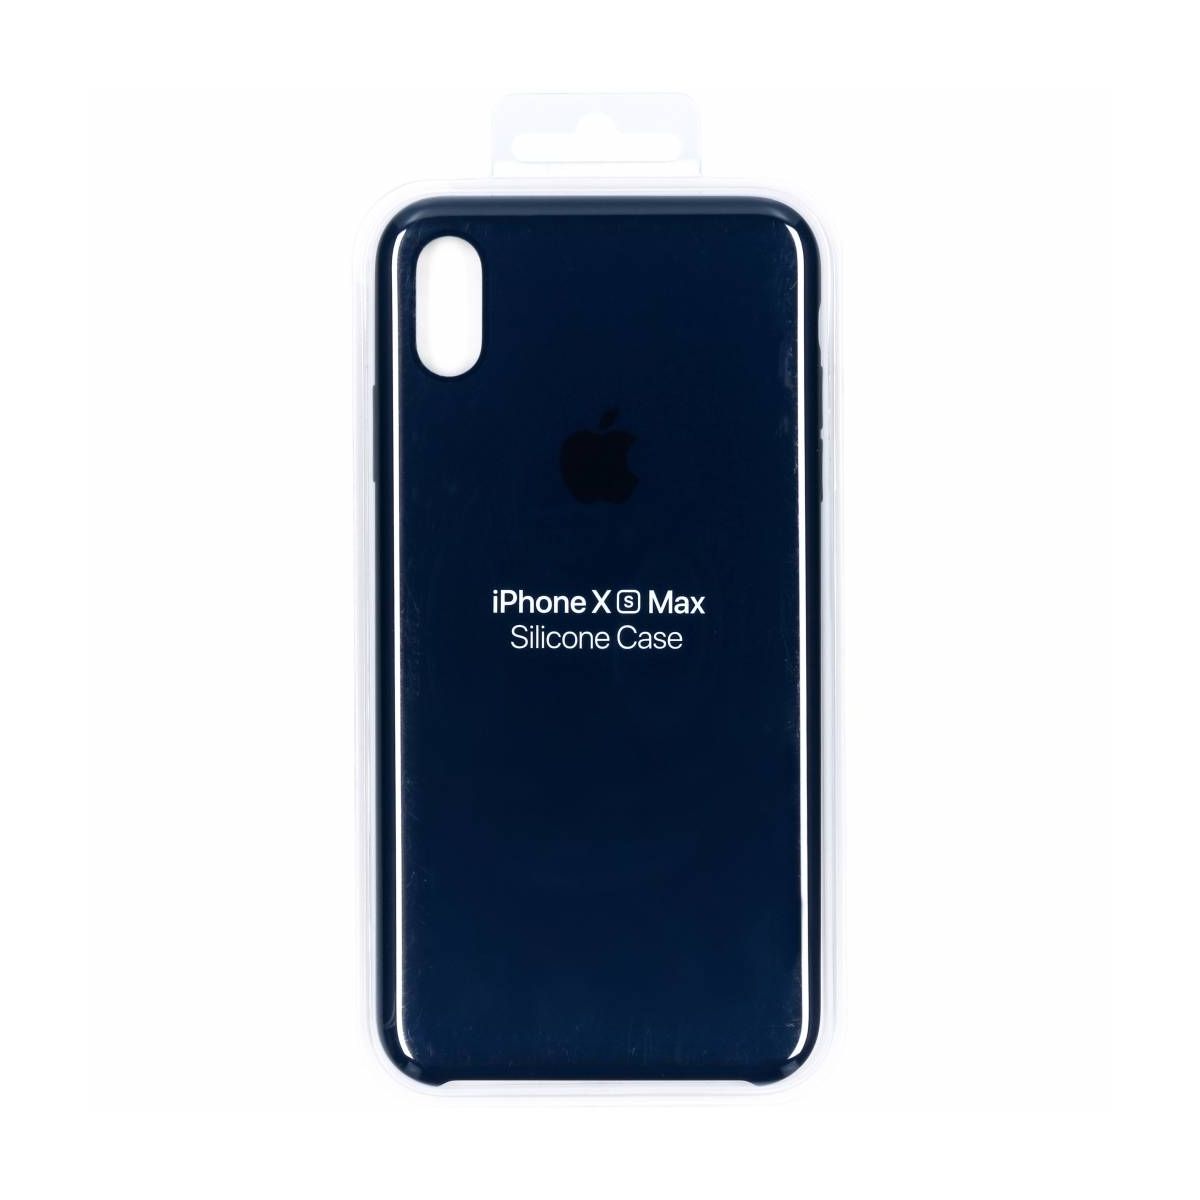 Apple Silicone Backcover for iPhone Xs Max - Midnight Blue